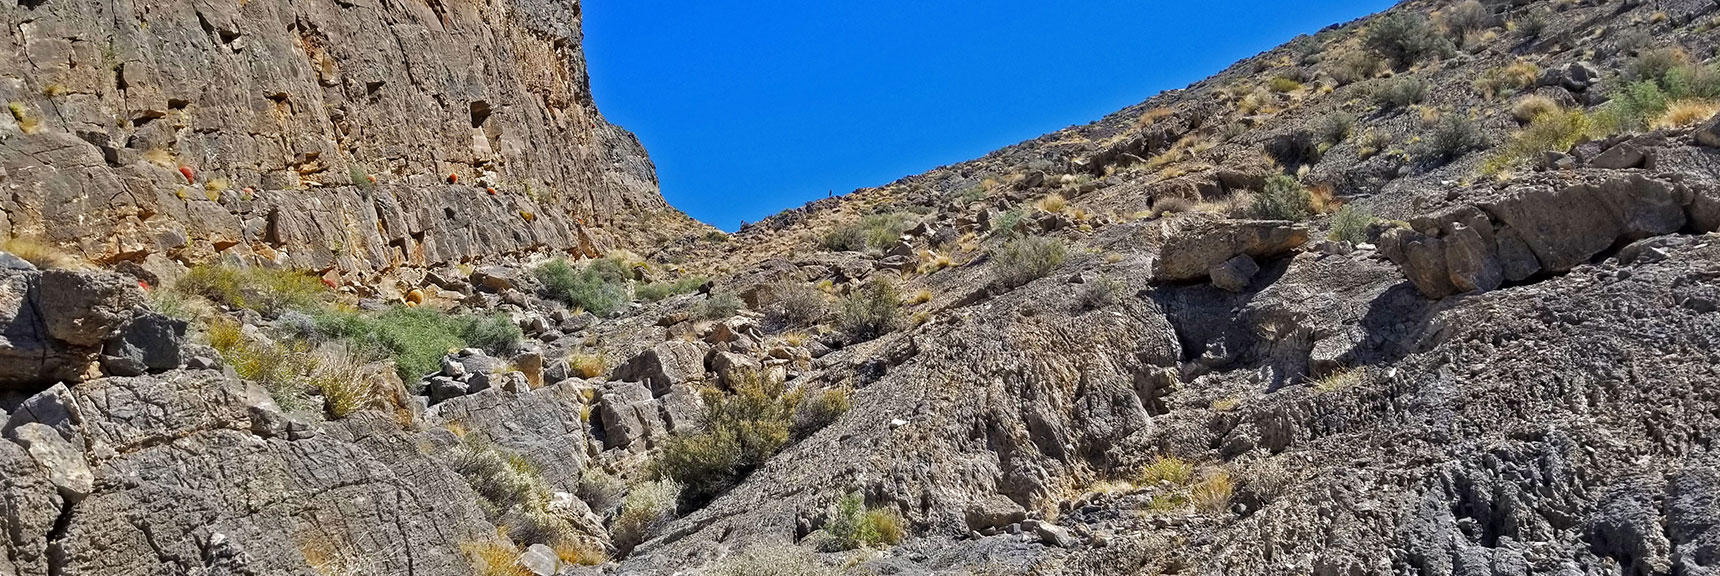 View Up This Descent Gully. Ancient Dark Rock But Few Fossils | Fossil Ridge End to End | Sheep Range | Desert National Wildlife Refuge, Nevada